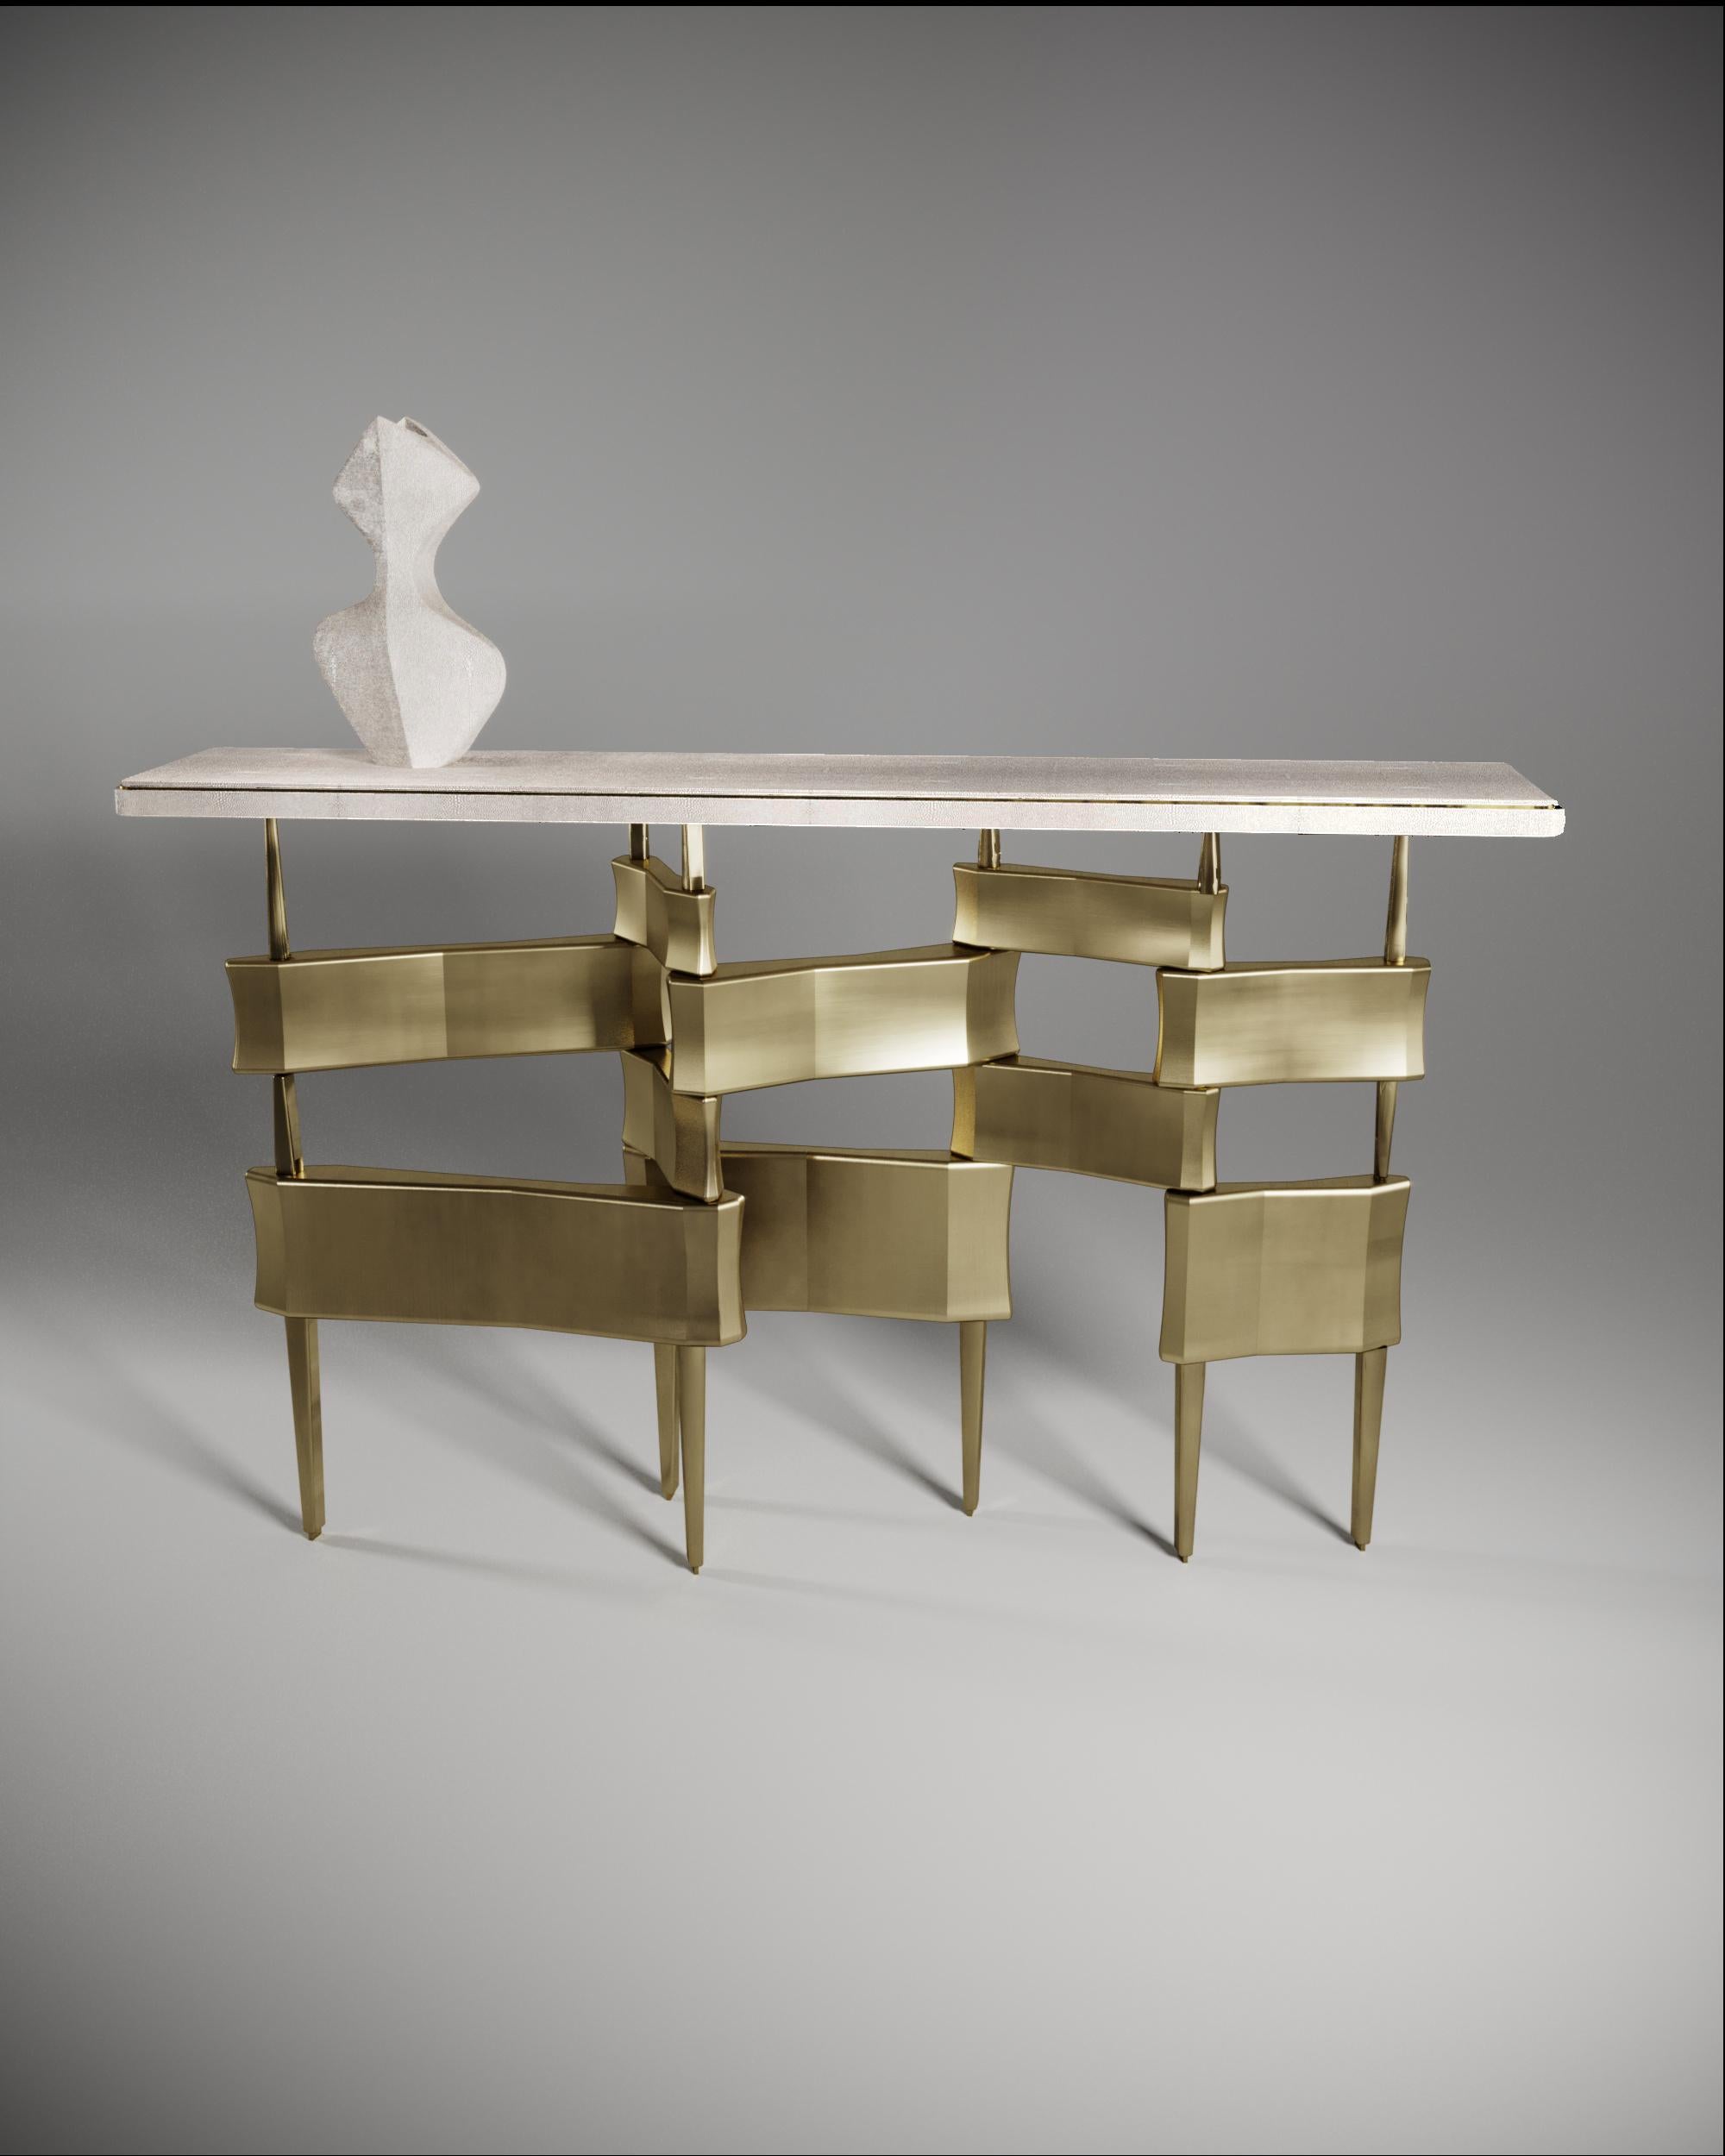 The Metropolis console table by Kifu Paris is a dramatic and sculptural design that demonstrates the incredible and signature artisanale work from her Augousti genes. The bronze-patina brass base of the console is conceptually inspired by the